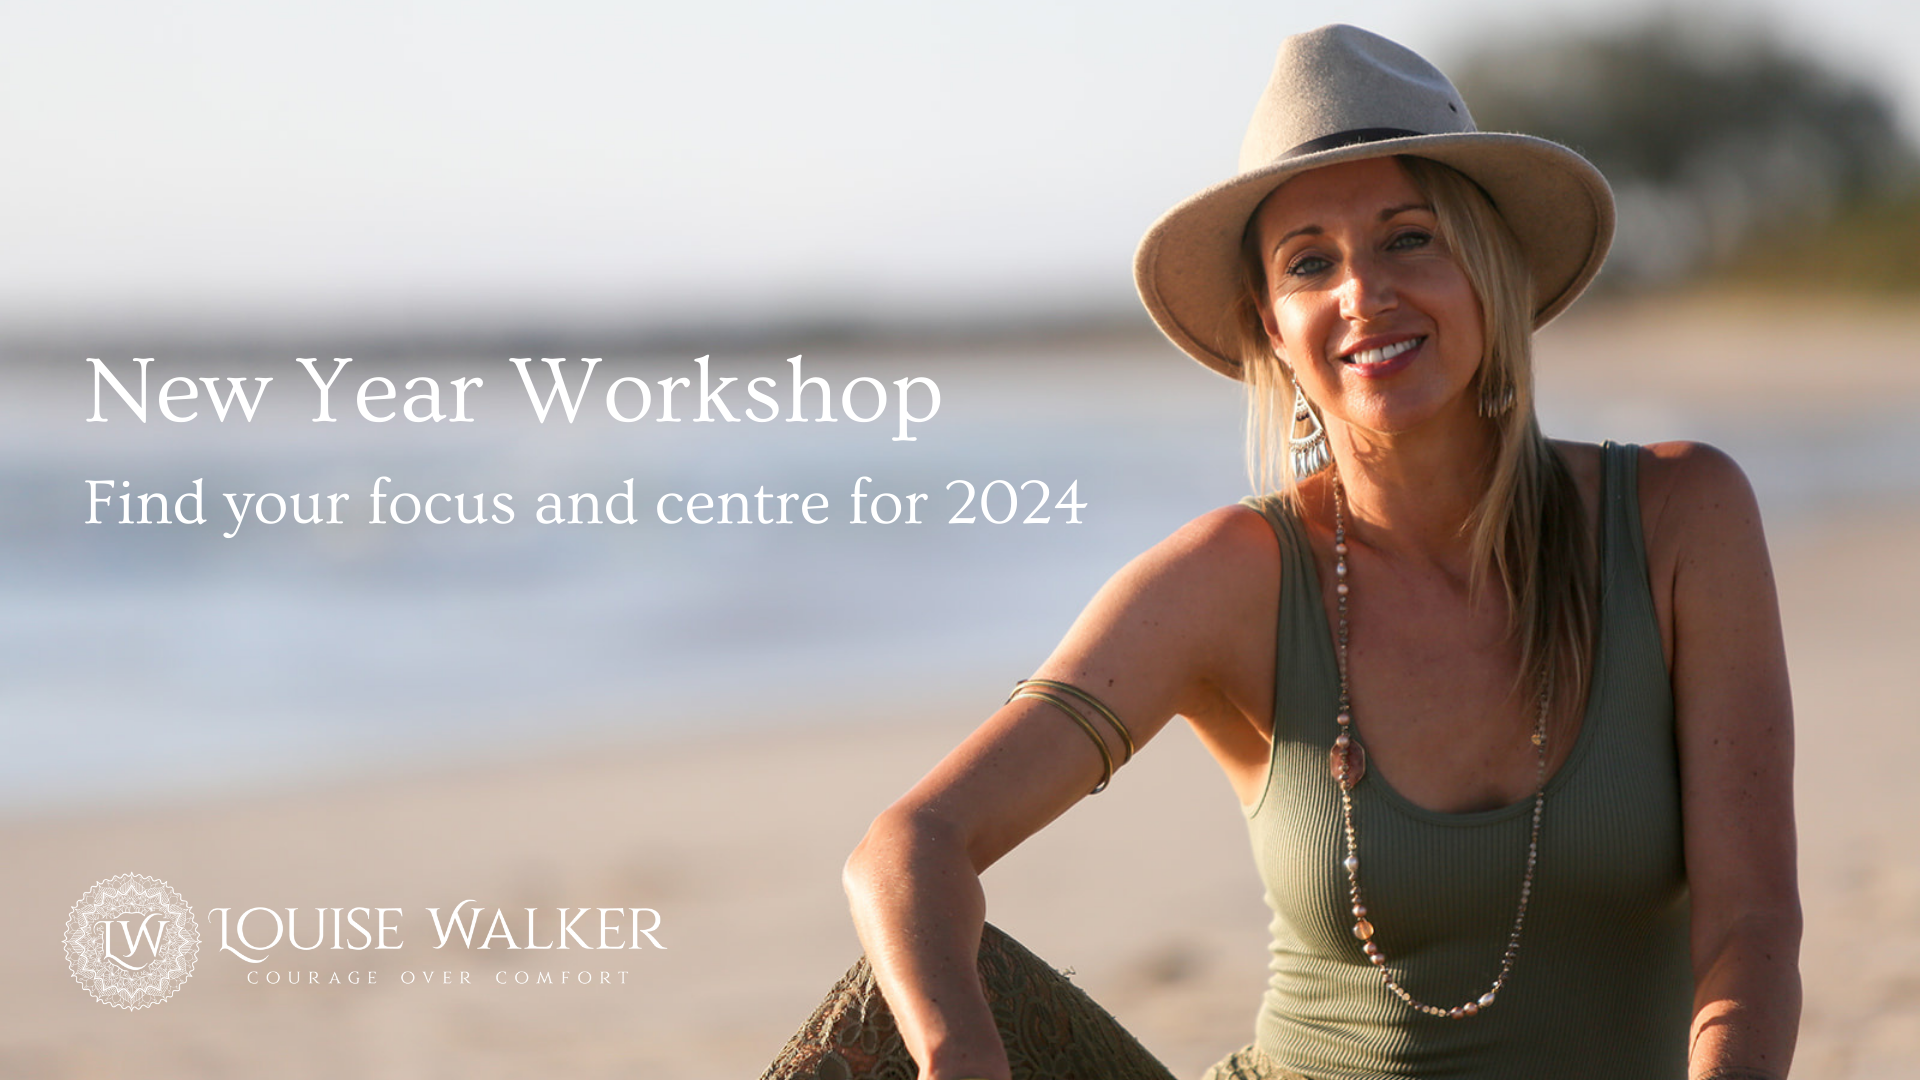 NEW YEAR WORKSHOP: Find your focus and centre for 2024